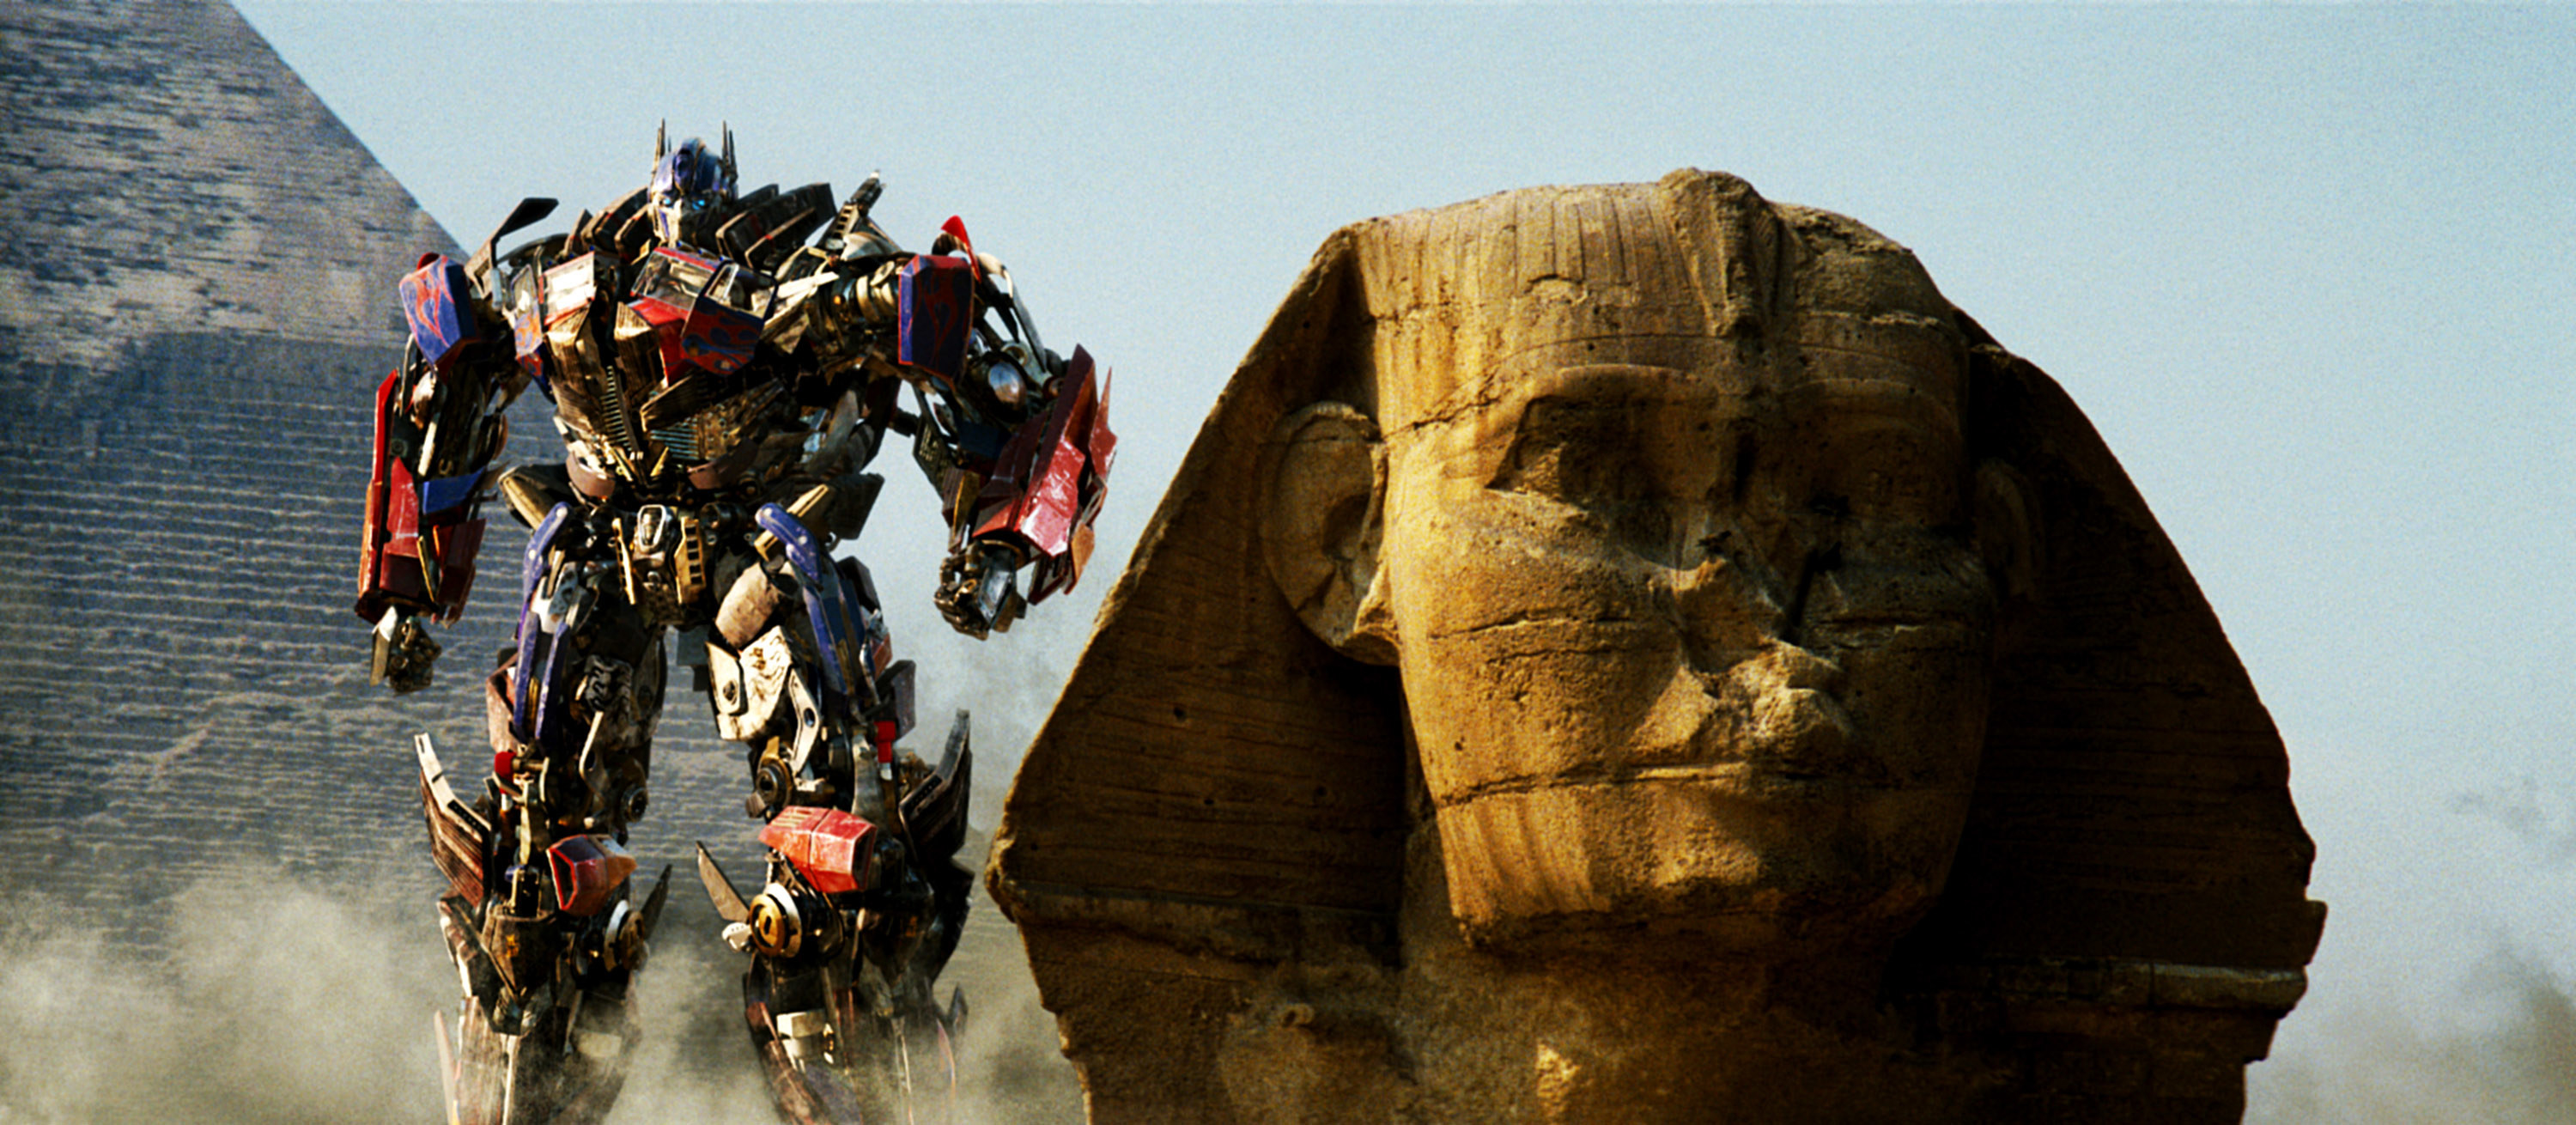 transformer next to a large egyptian statue